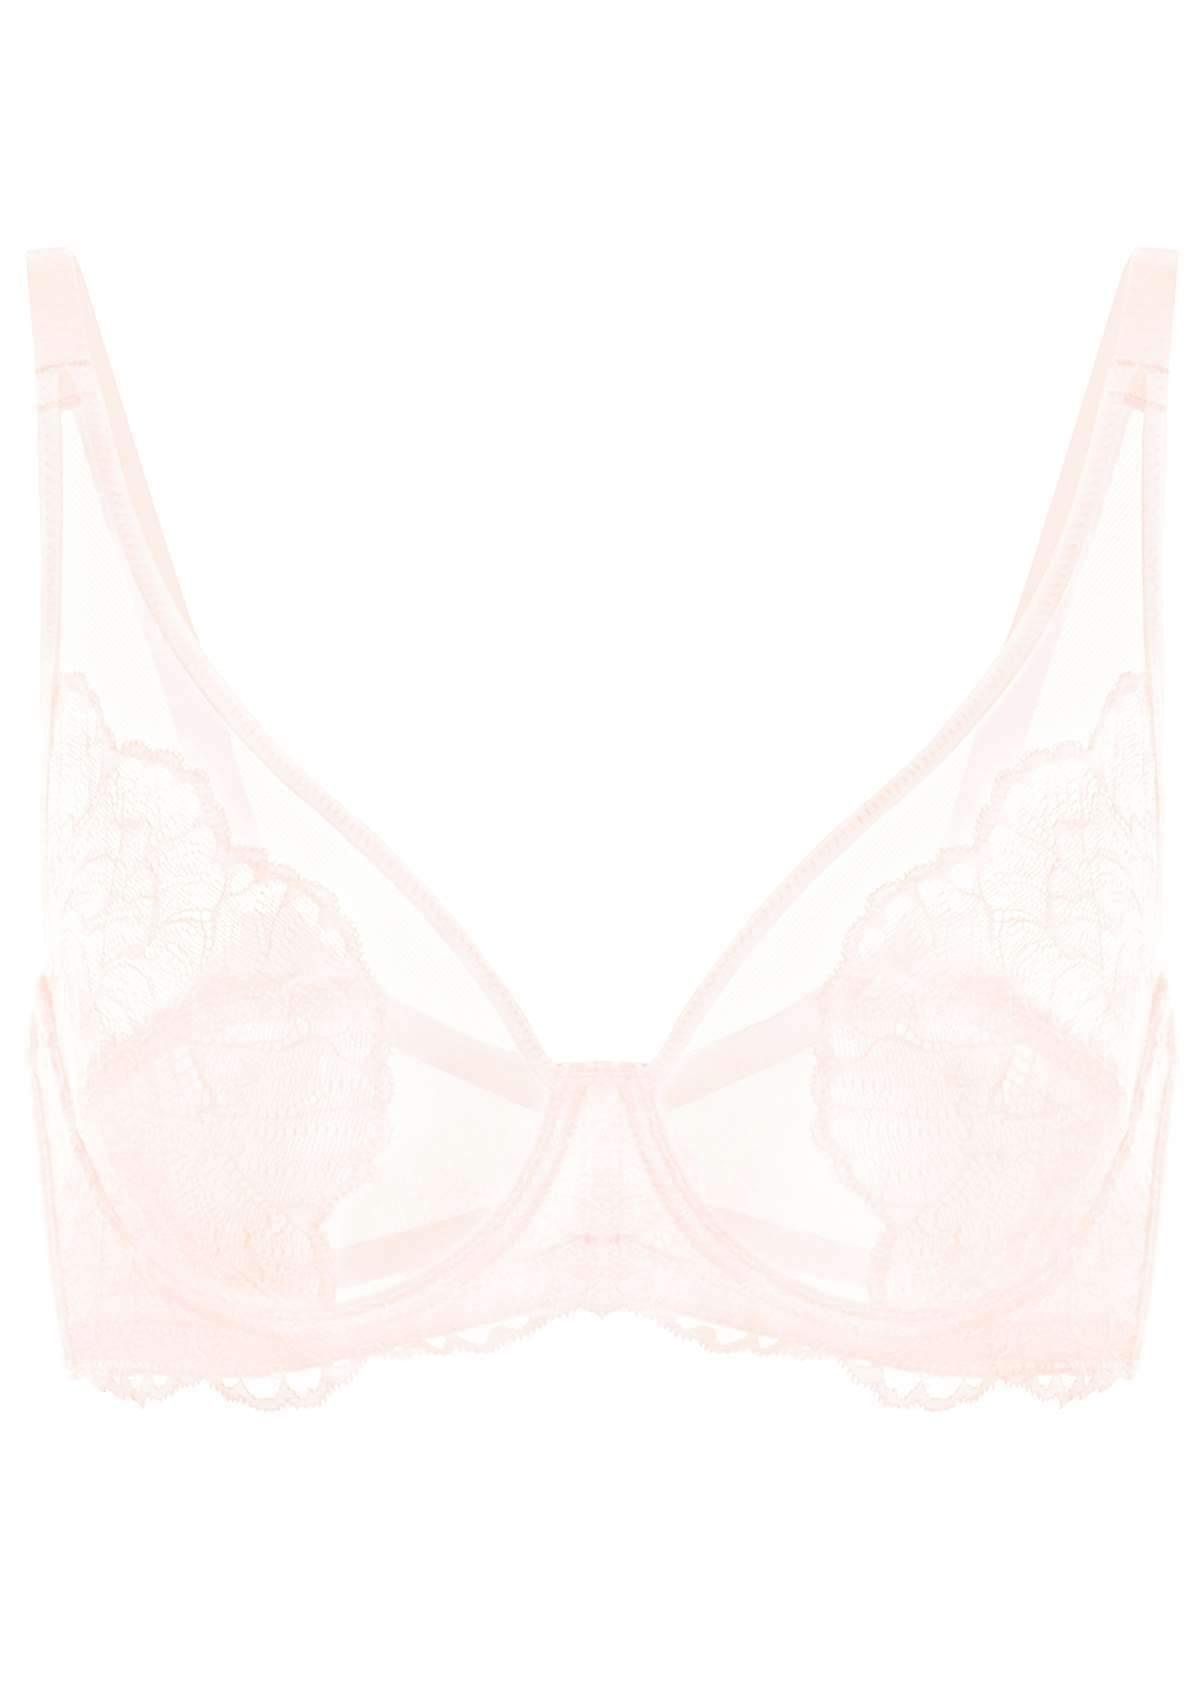 HSIA Blossom Sheer Lace Bra: Comfortable Underwire Bra For Big Busts - White / 36 / G